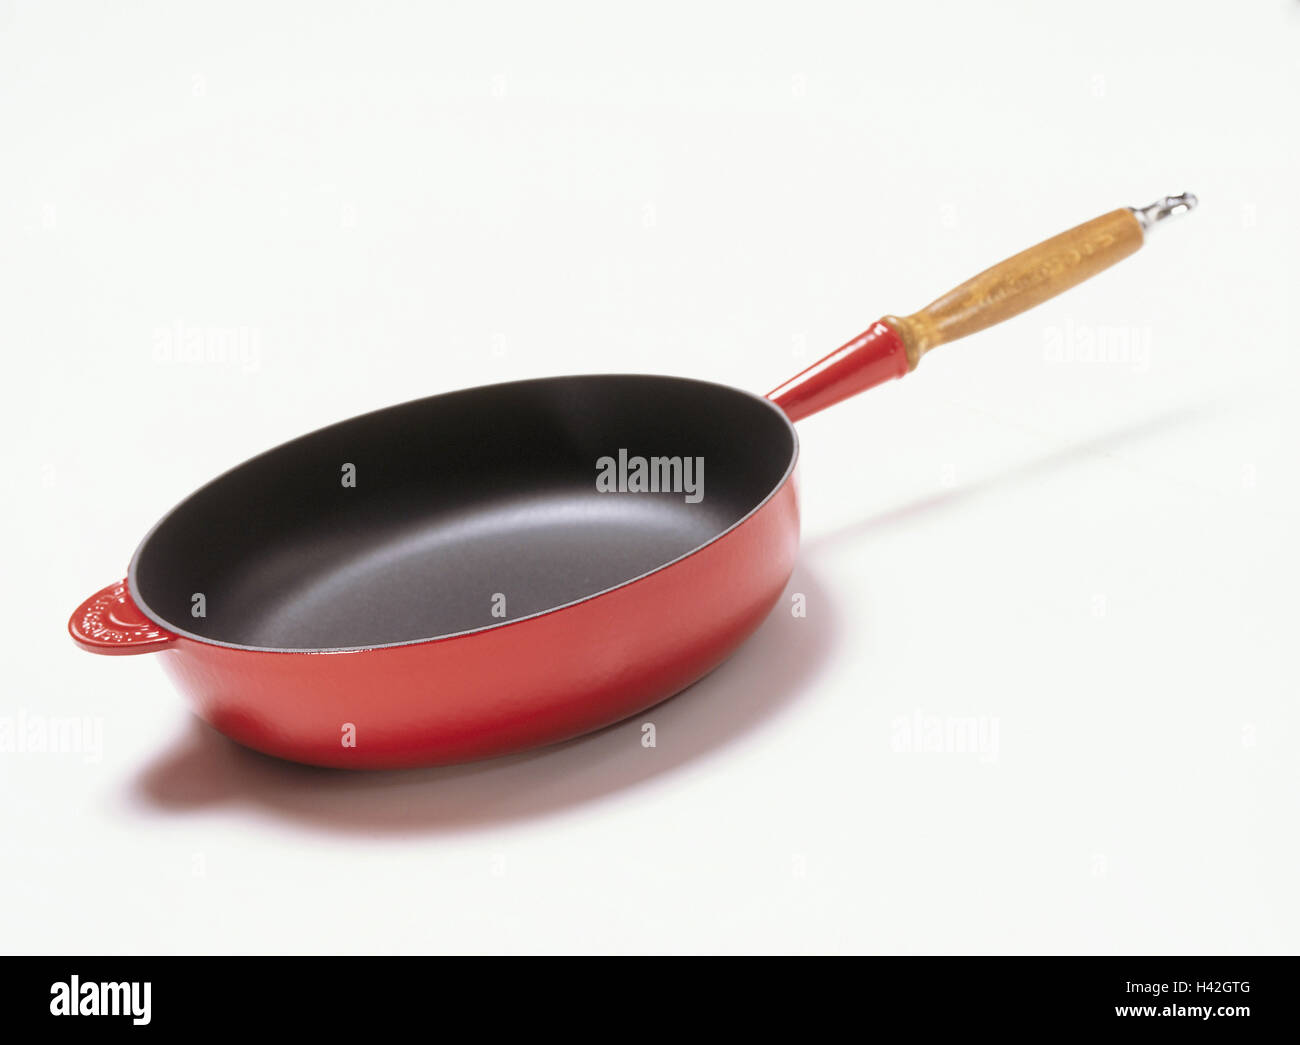 Frying pan, red pan, wooden grip, handle pan, household articles, culinary articles, cook, roast, cuisine, Still life, product photography, studio Stock Photo